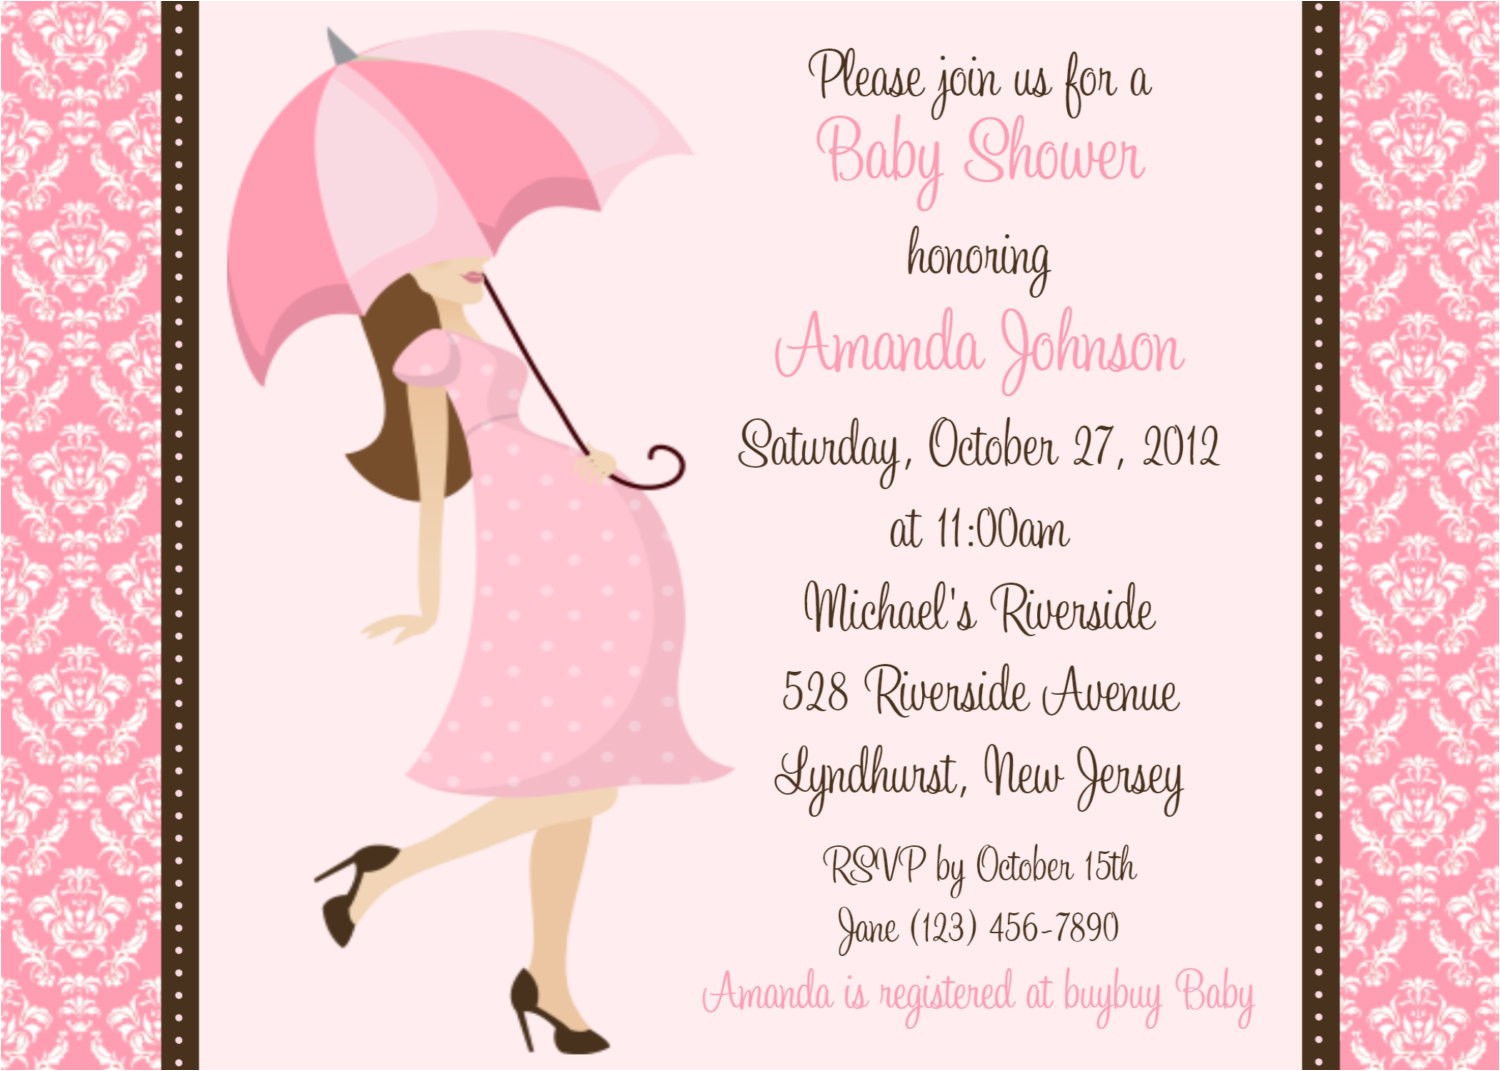 Images for Baby Shower Invitations Baby Shower Invitation Wording Fashion & Lifestyle